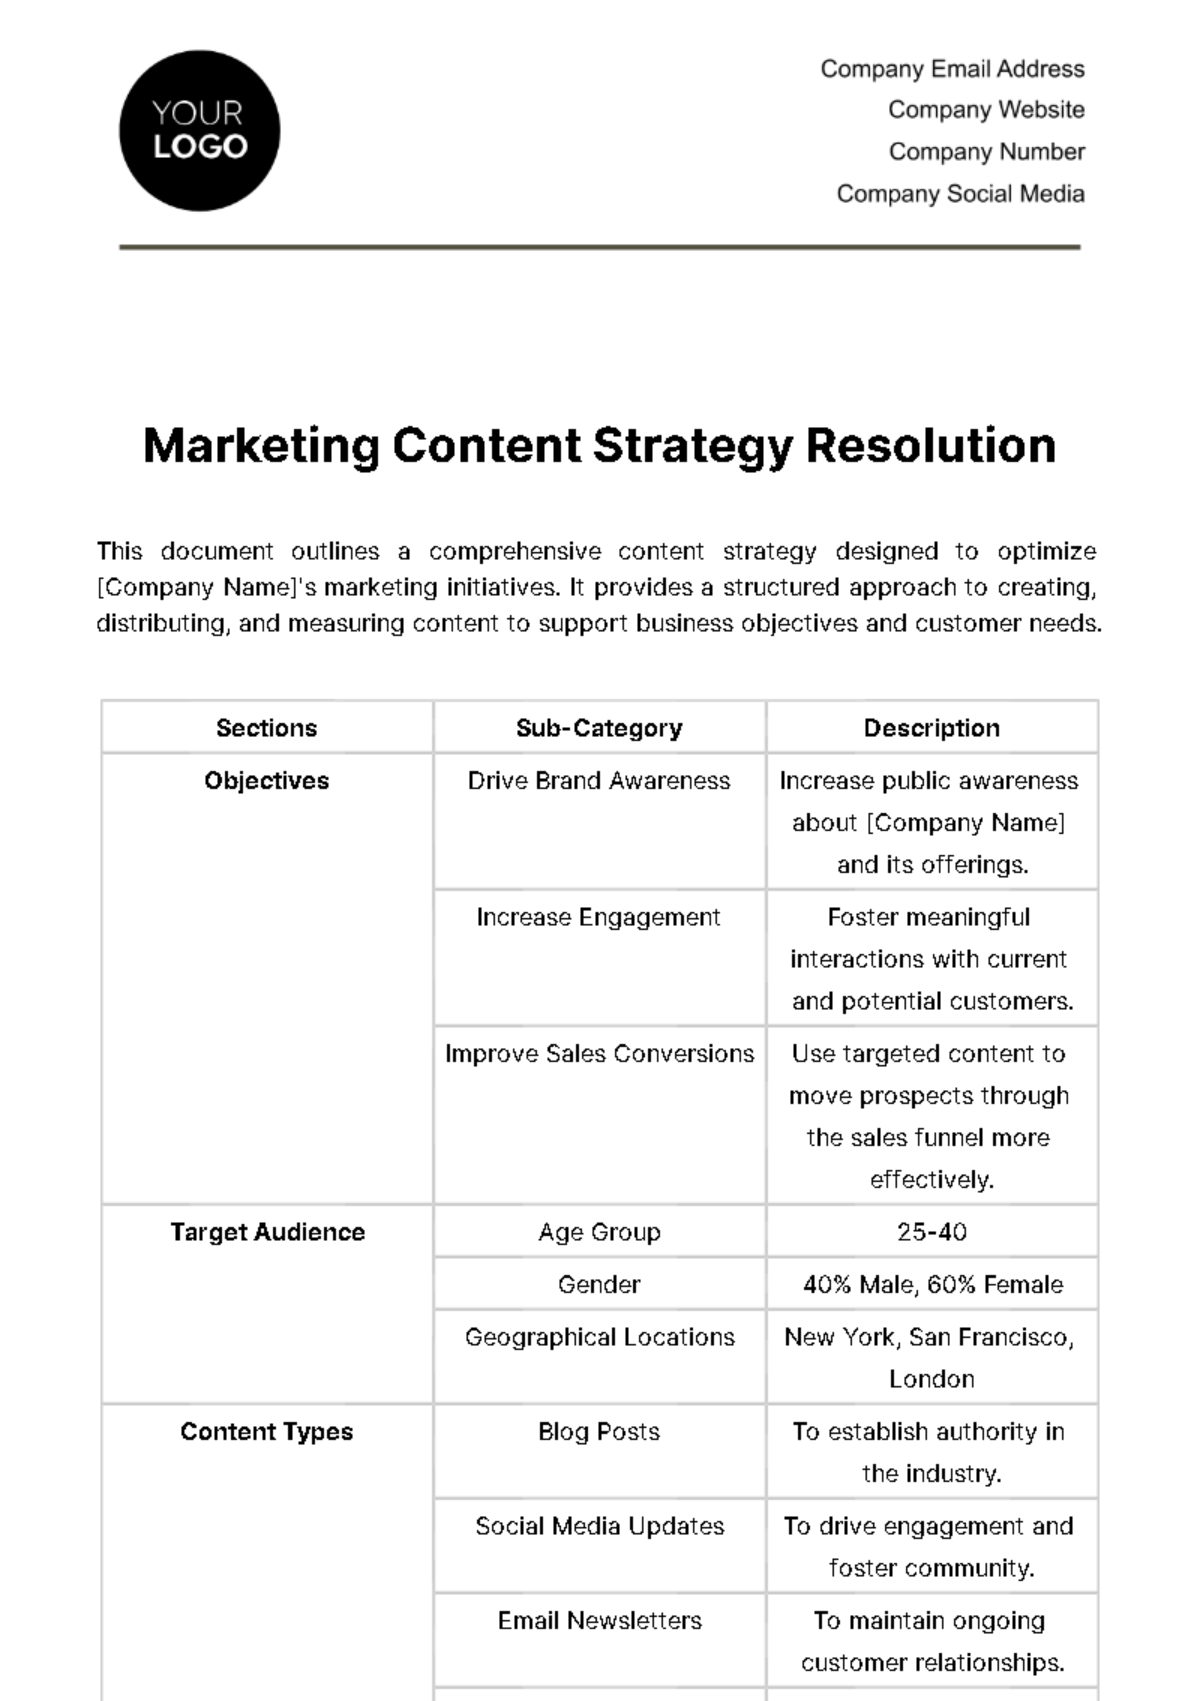 Marketing Content Strategy Resolution Template